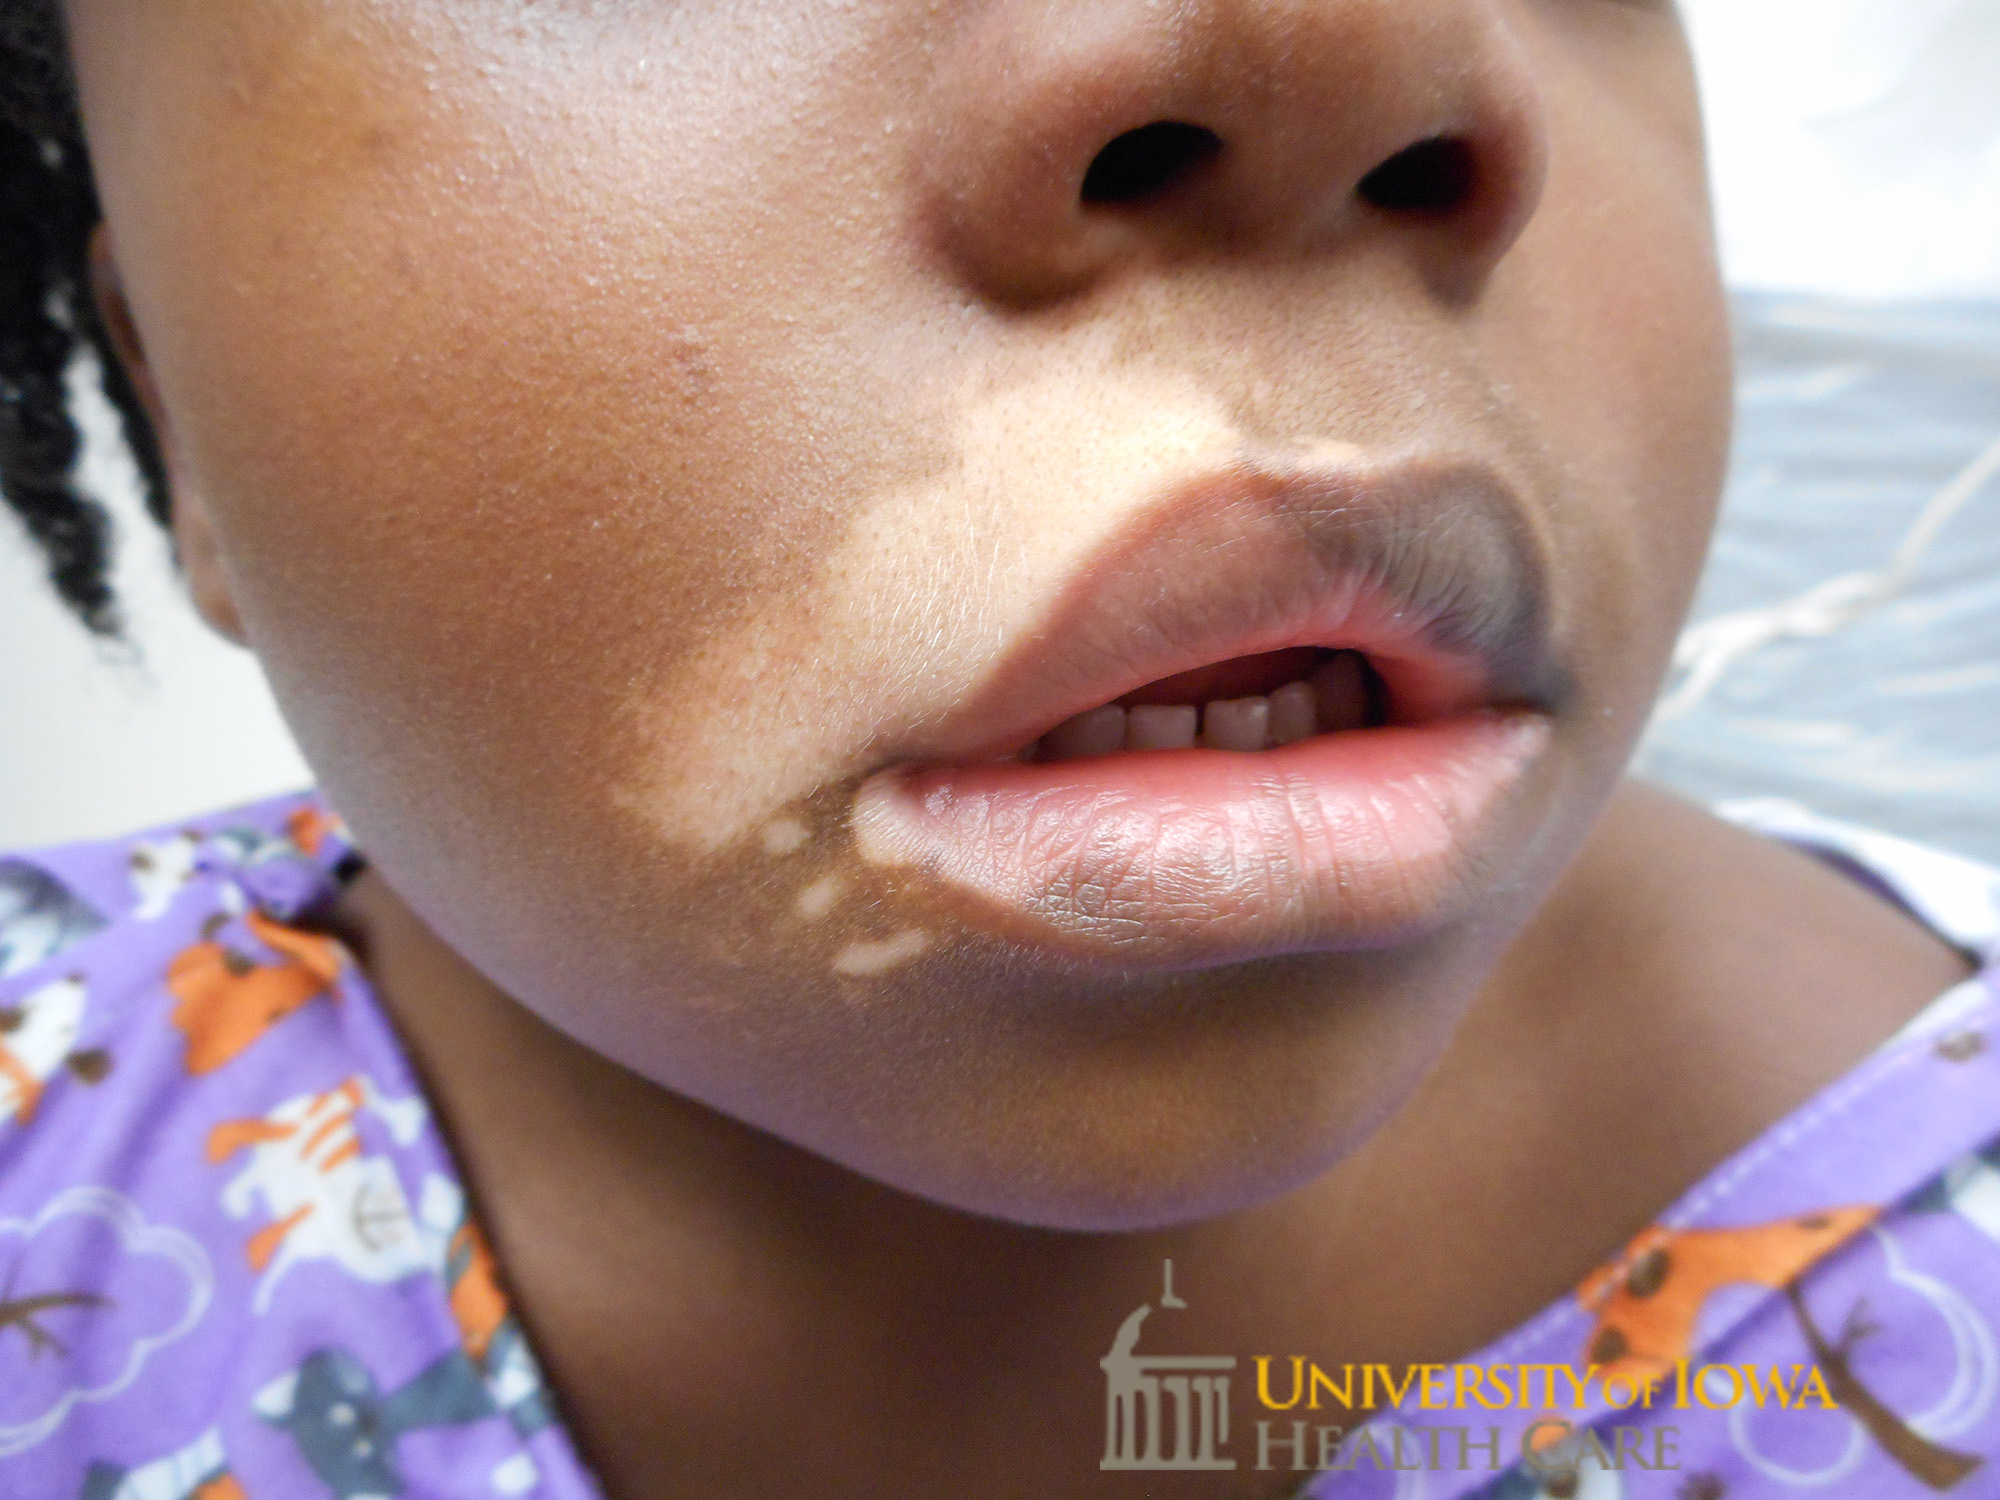 Depigmented patches on the vermillion lip extending to the cutaneous lip and cheek. (click images for higher resolution).